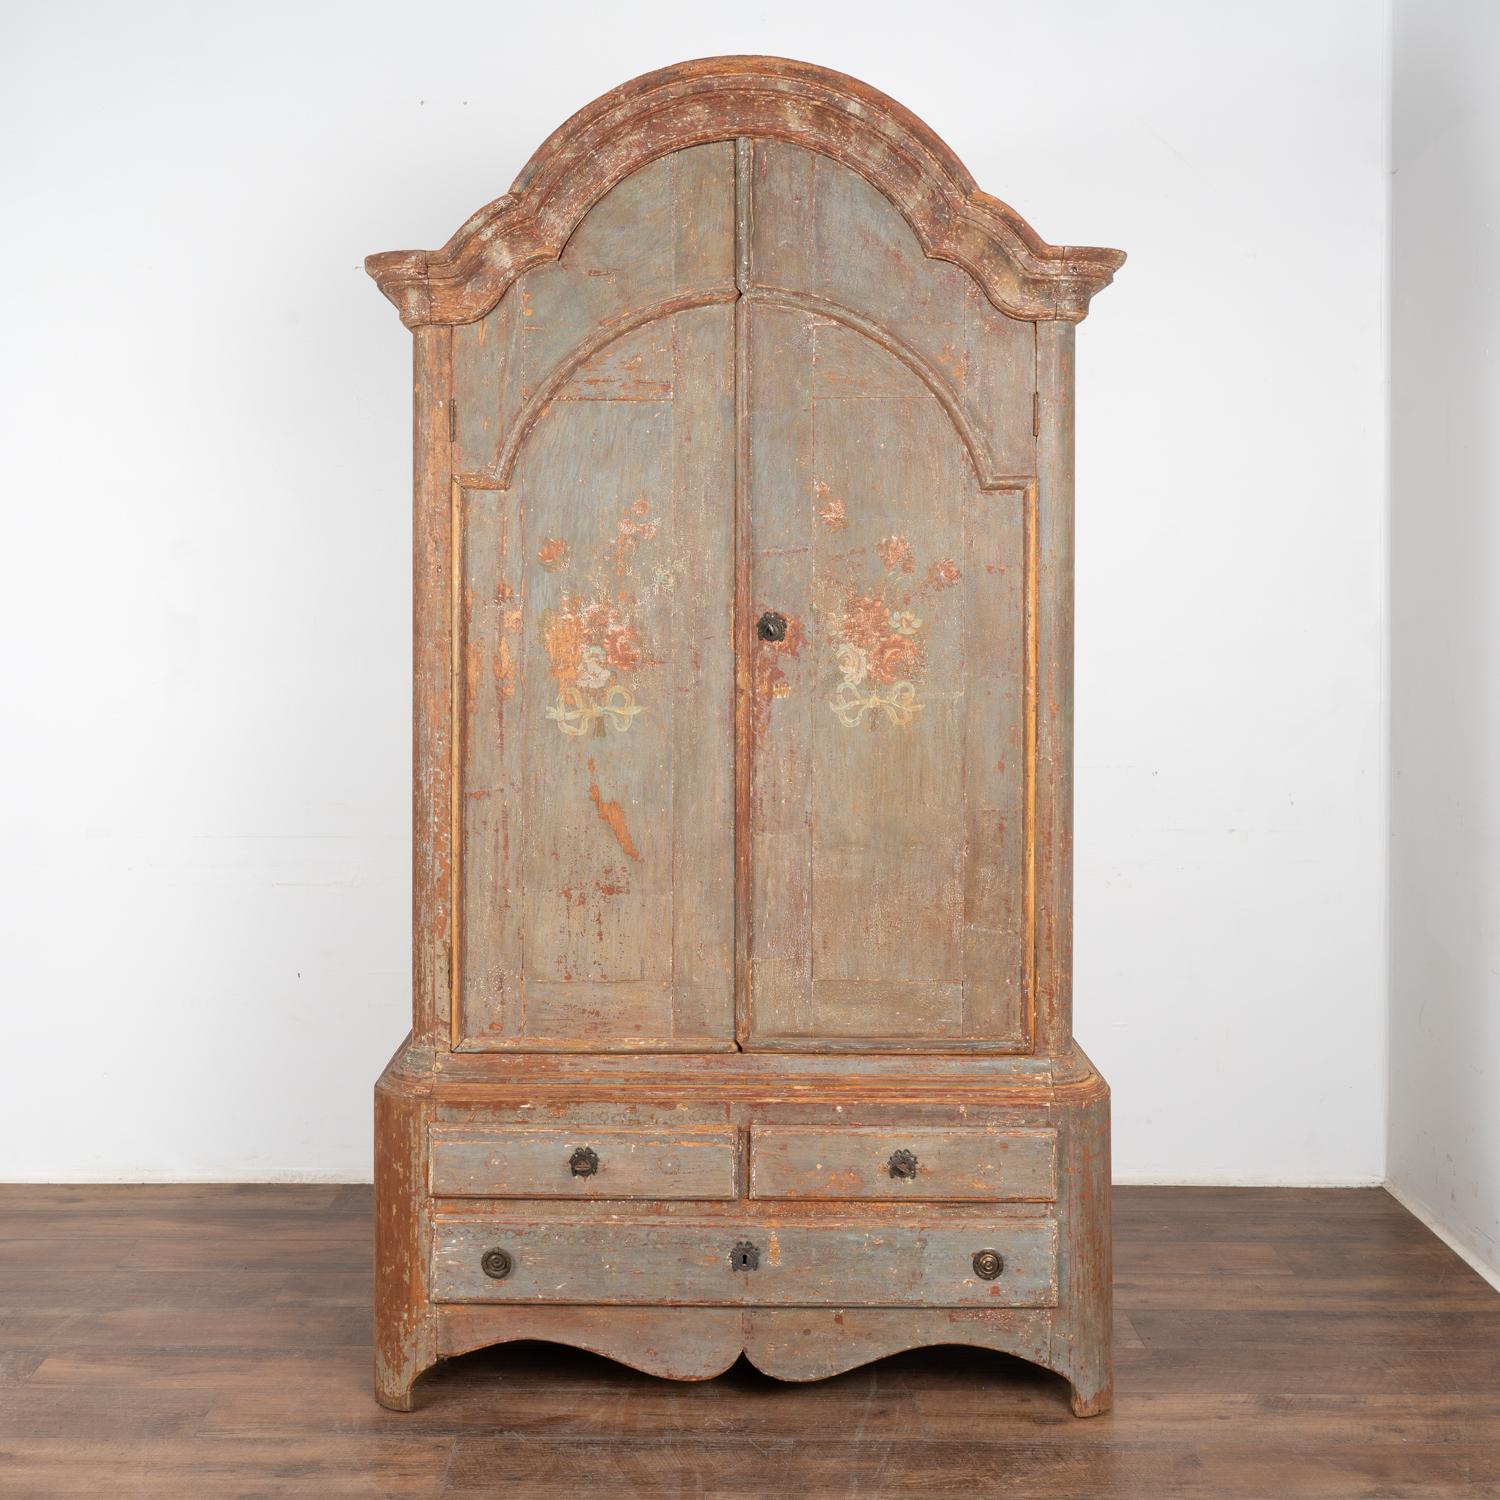 Original Painted Pine Swedish Wedding Cabinet, circa 1820-40 In Good Condition For Sale In Round Top, TX